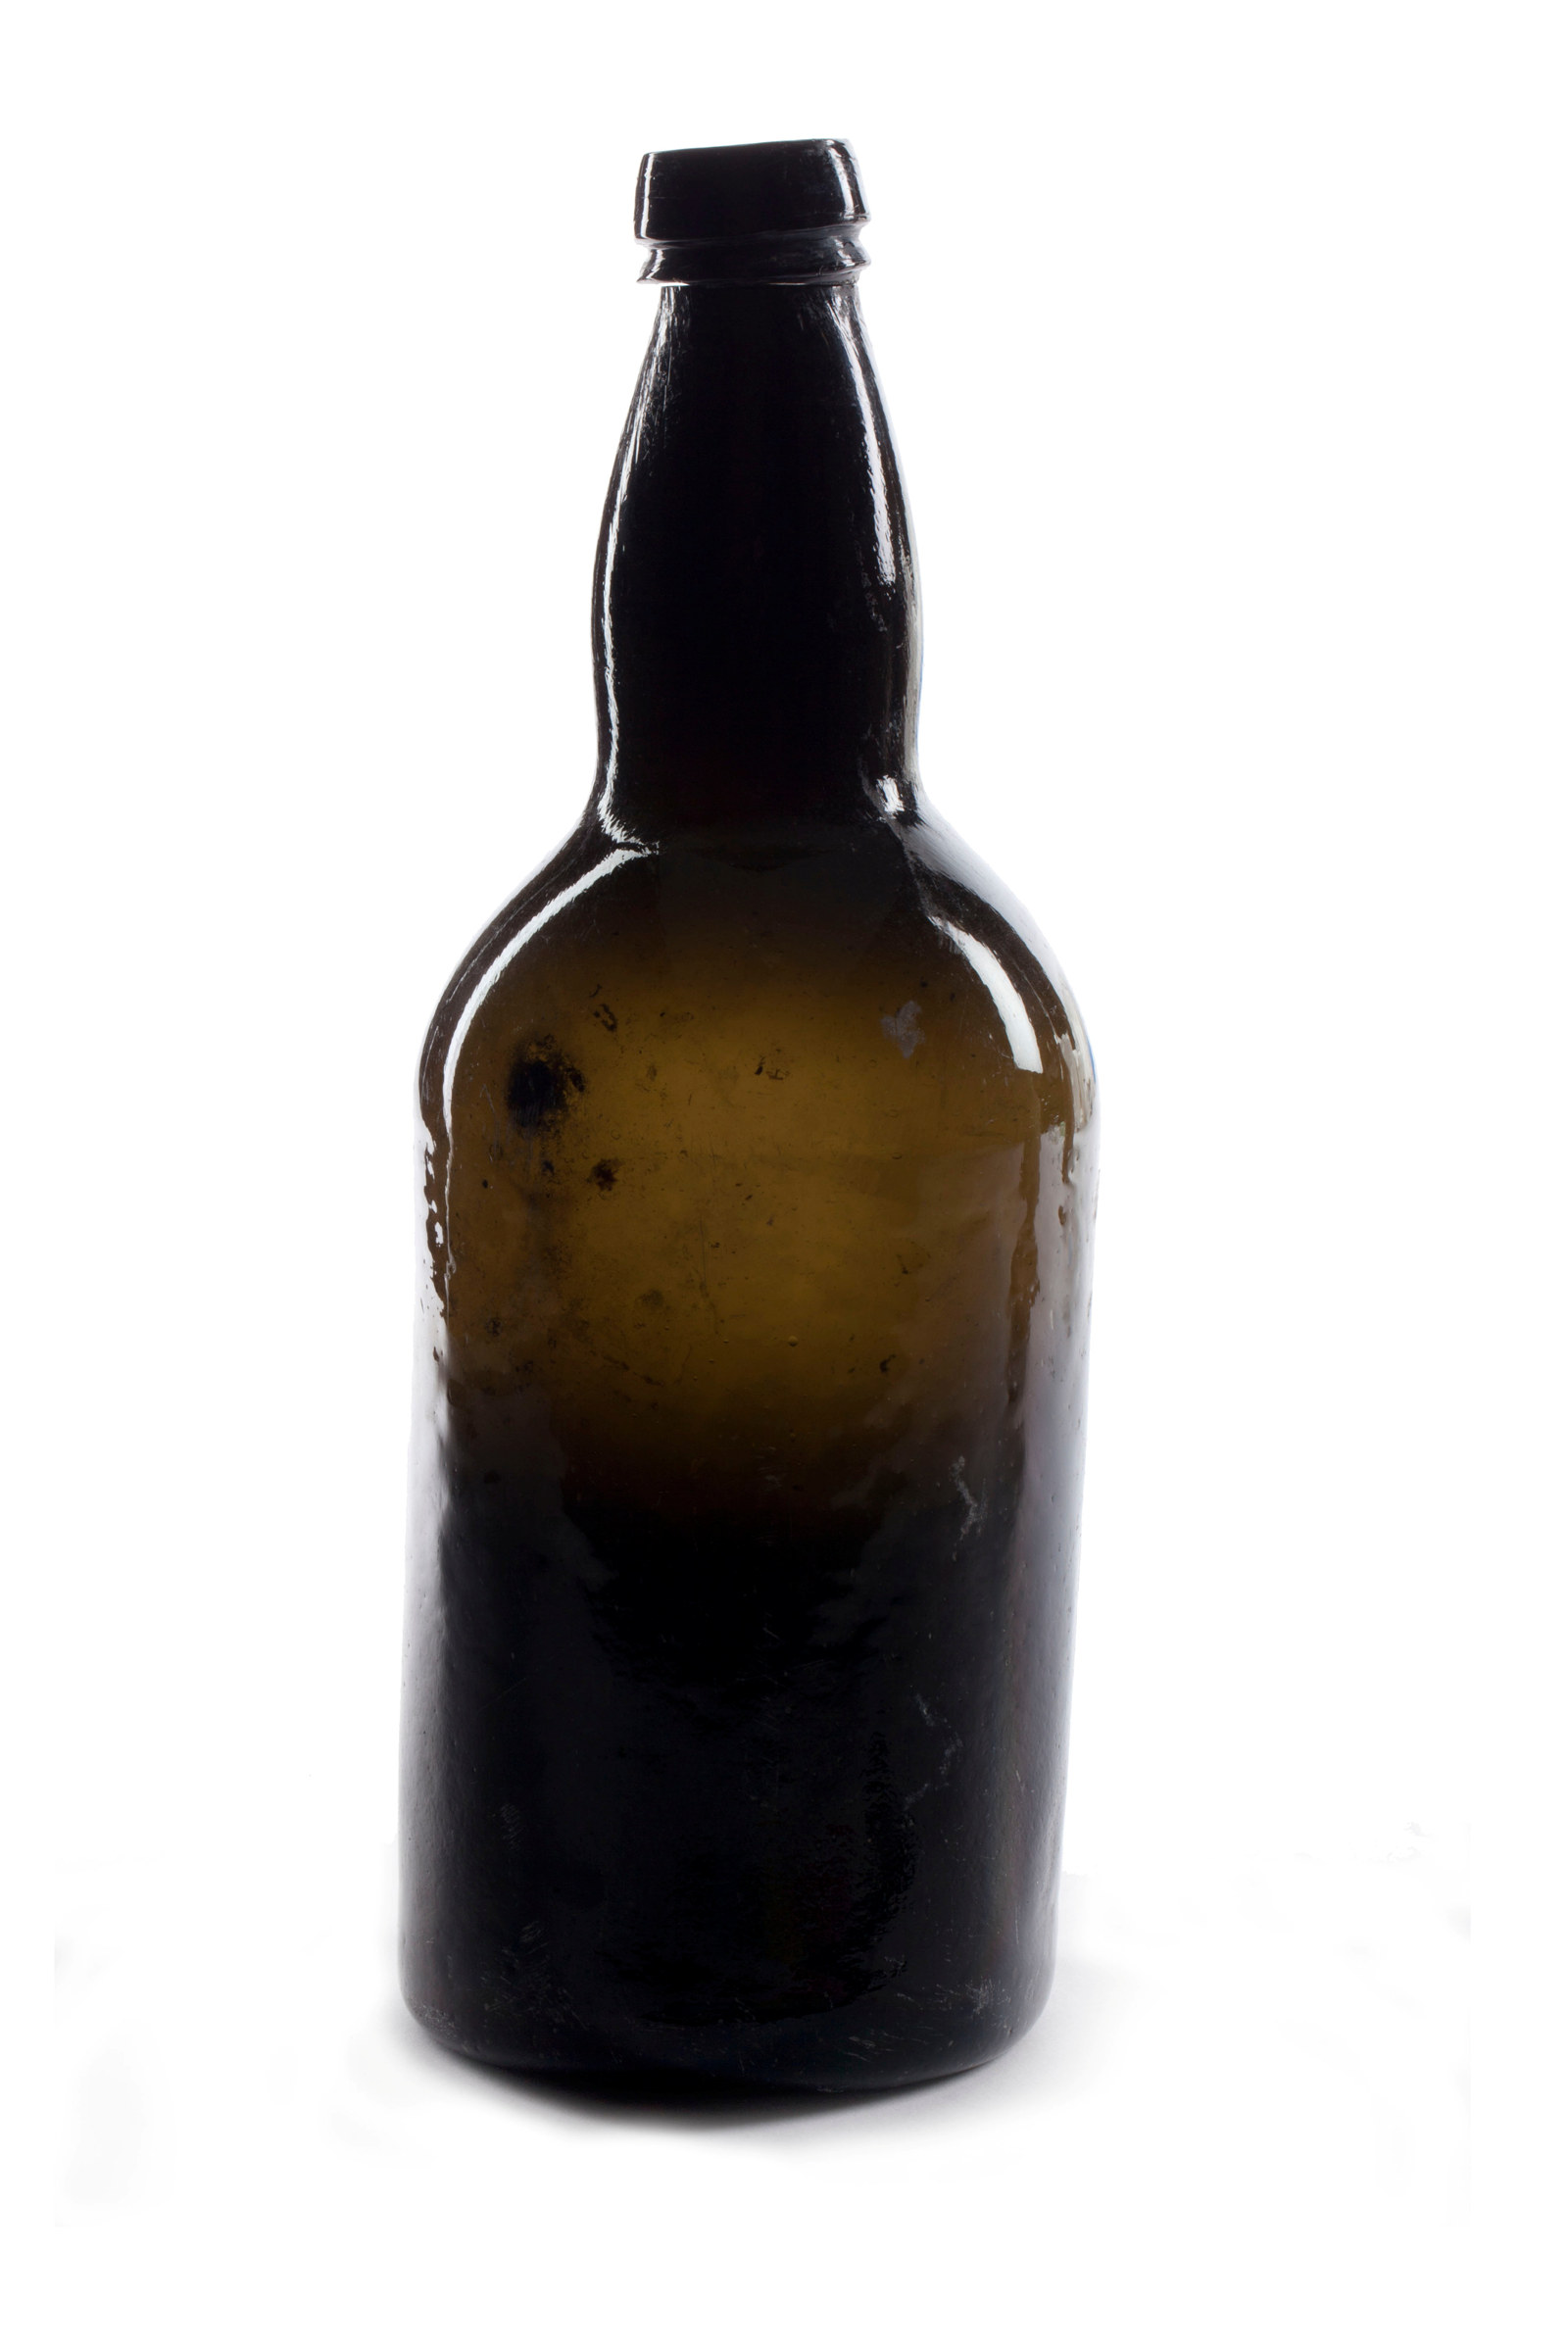 Alcohol bottle, dark olive glass, early -mid nineteenth century, excavated from beneath the ground floor of Hyde Park Barracks